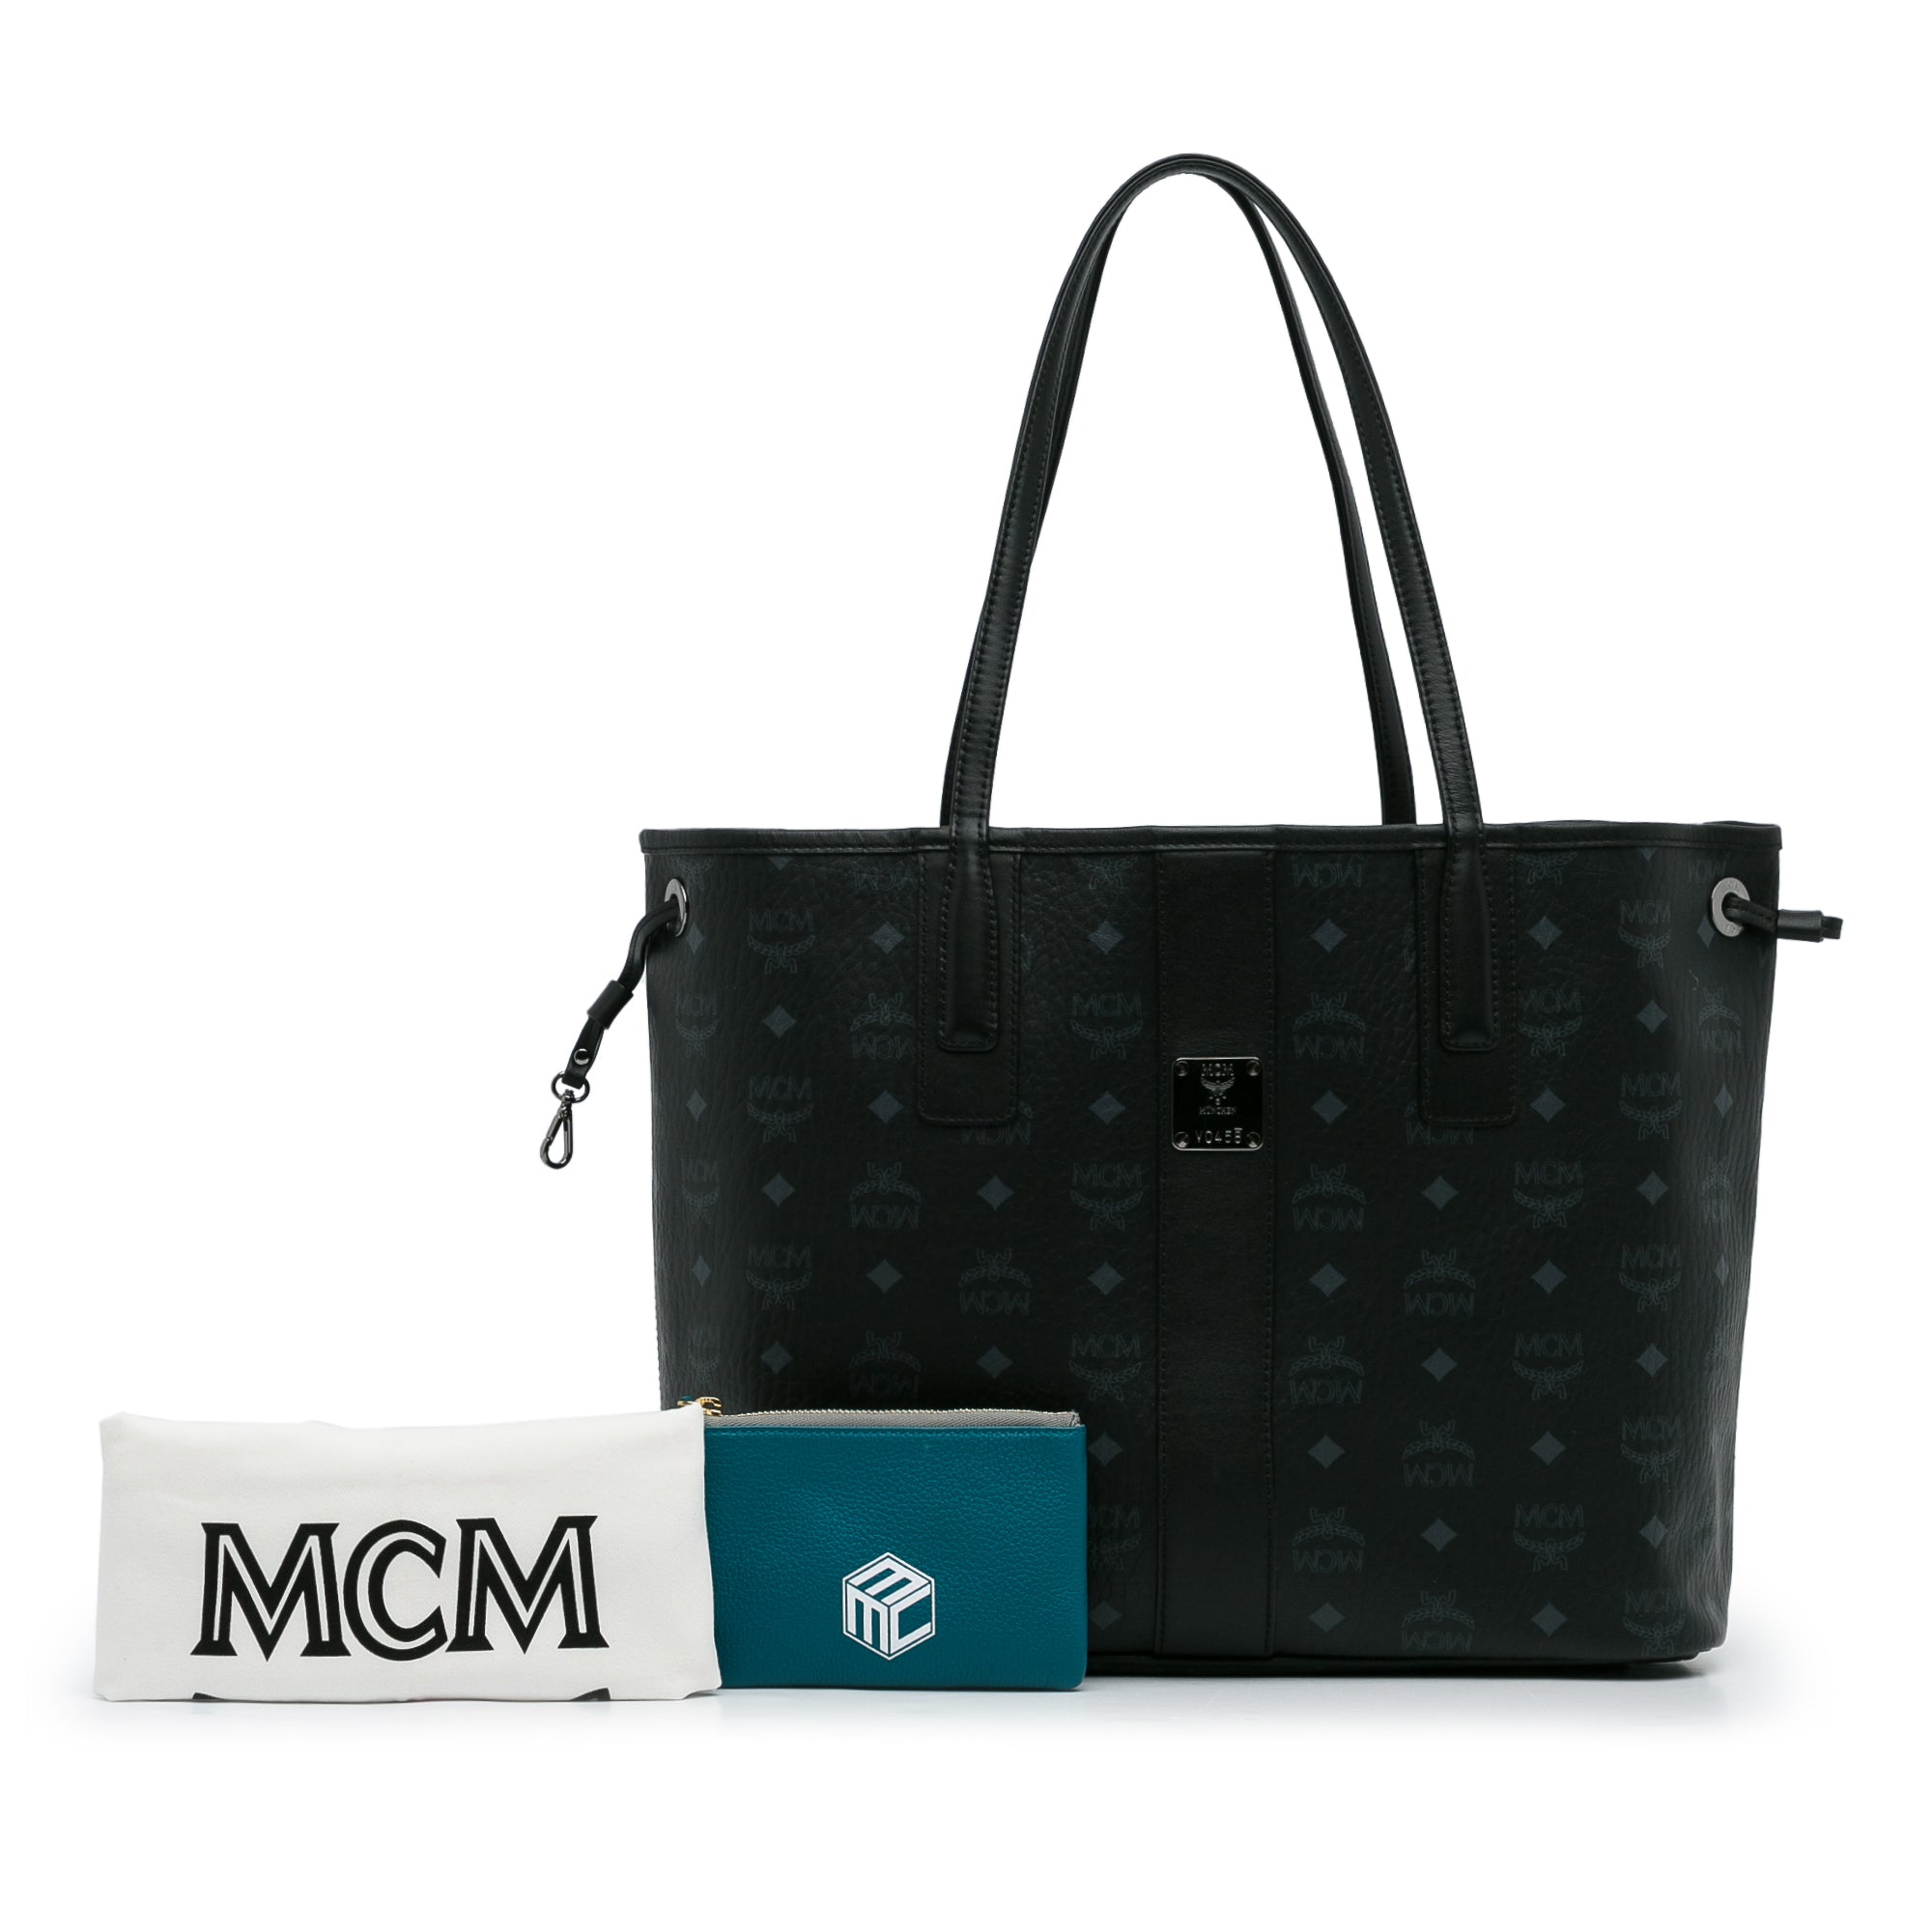 Mcm - Authenticated Handbag - Leather Black Plain for Women, Very Good Condition